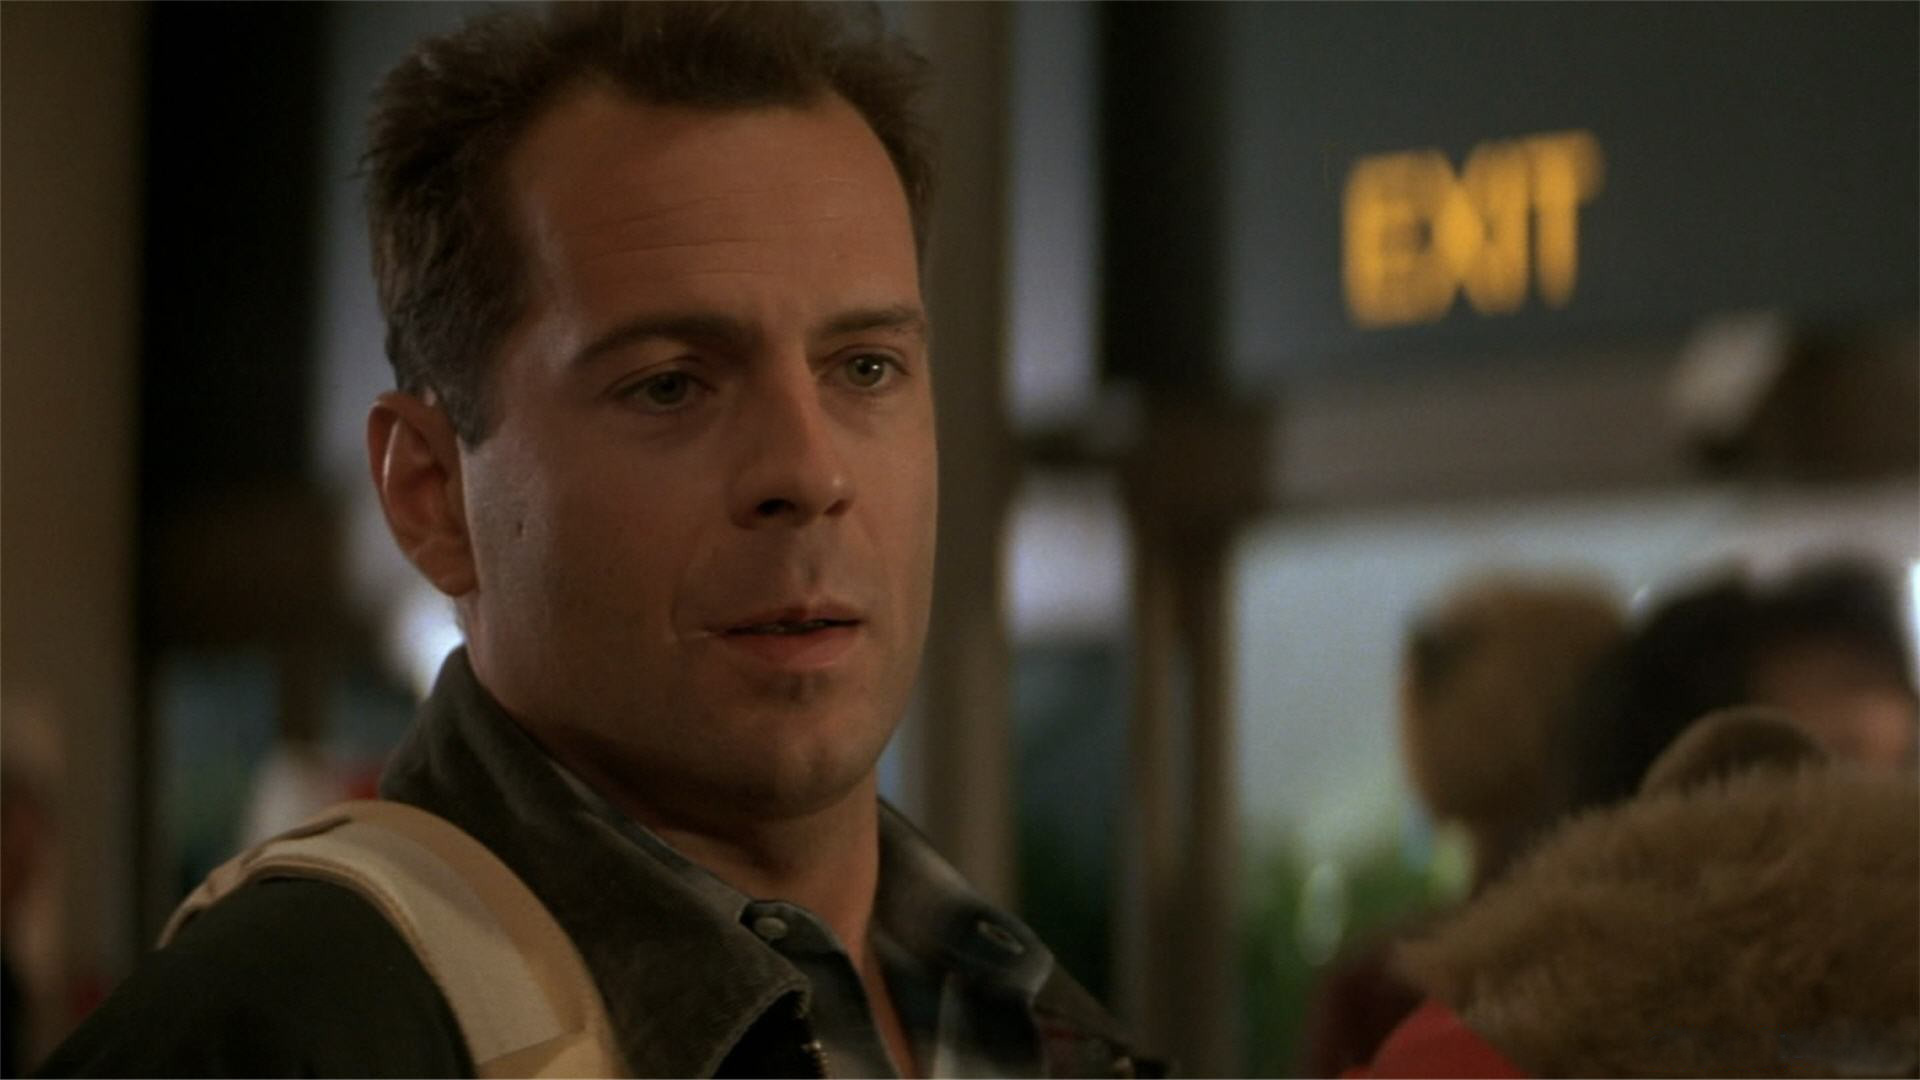 Die Hard 2, Epic wallpapers collection, Heart-pounding action, Cinematic thrills, 1920x1080 Full HD Desktop